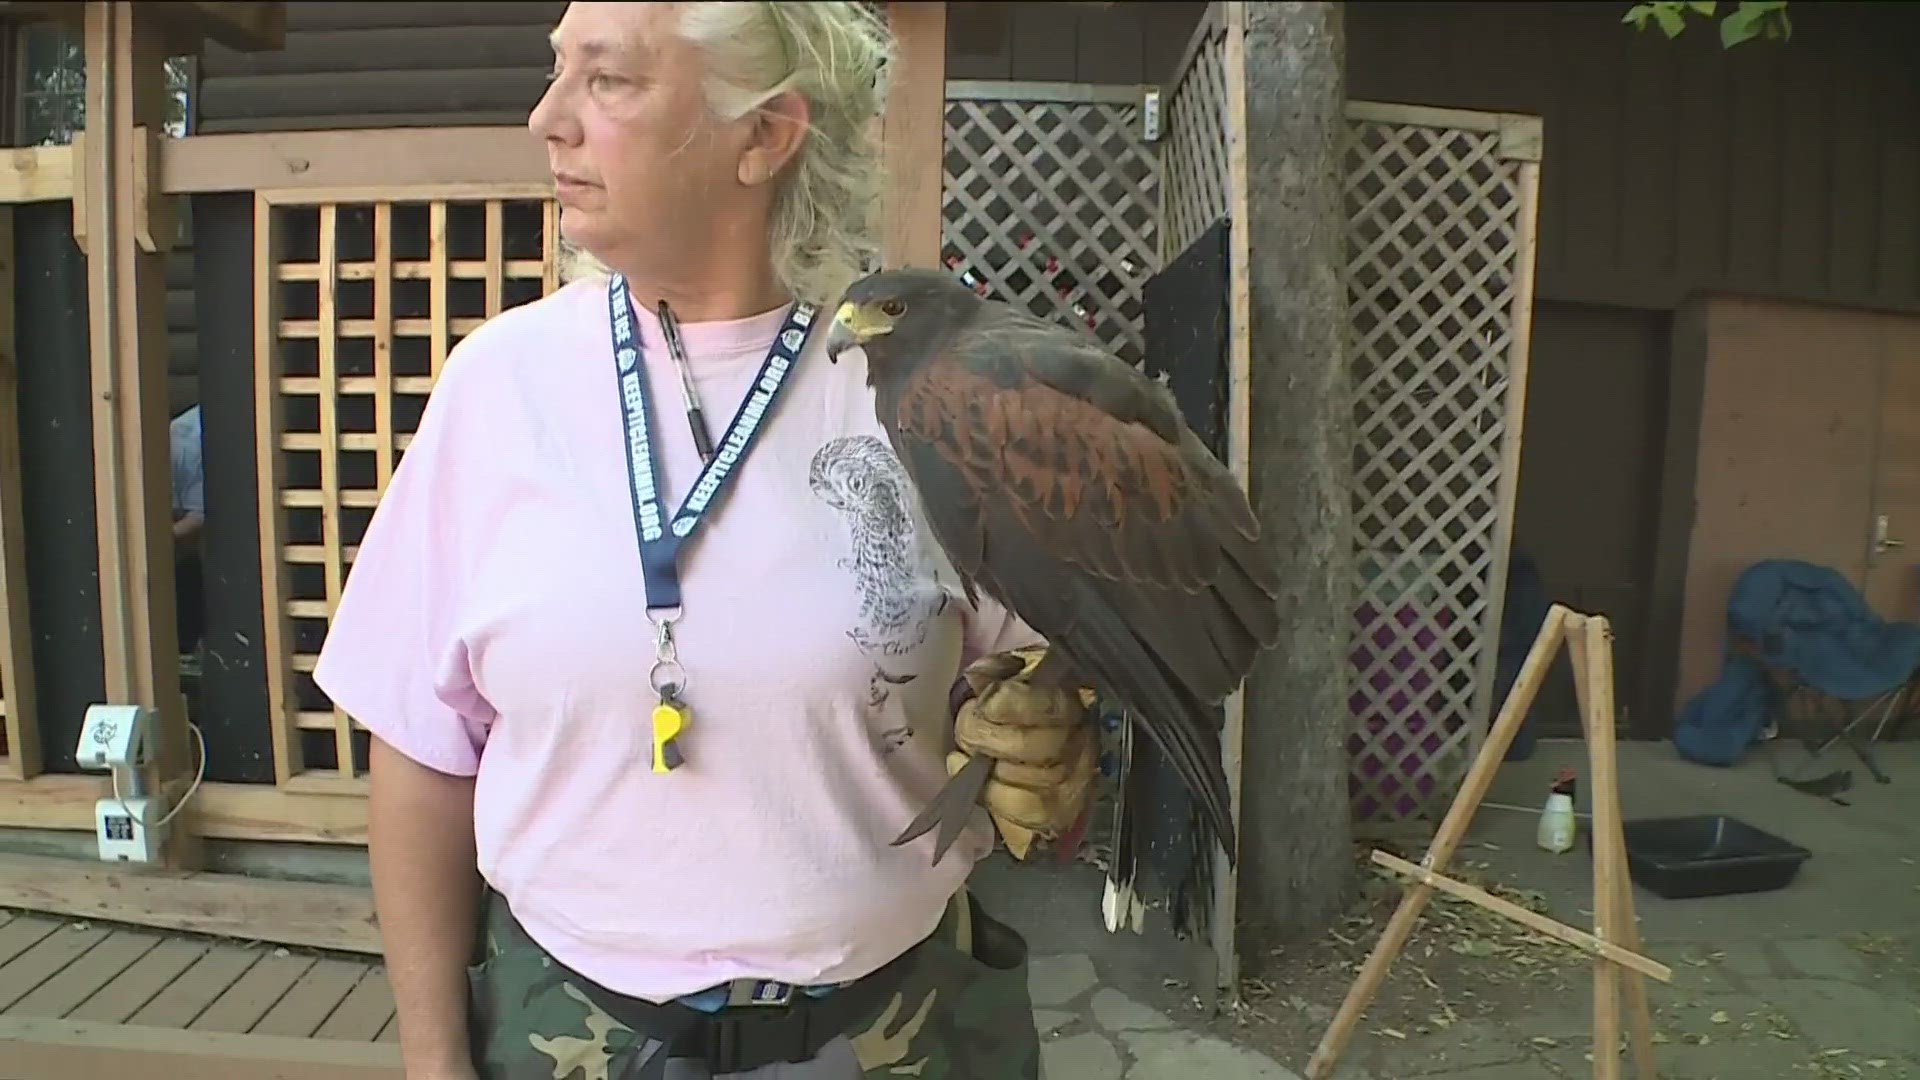 Learn all about Minnesota's birds of prey from the DNR at the State Fair.